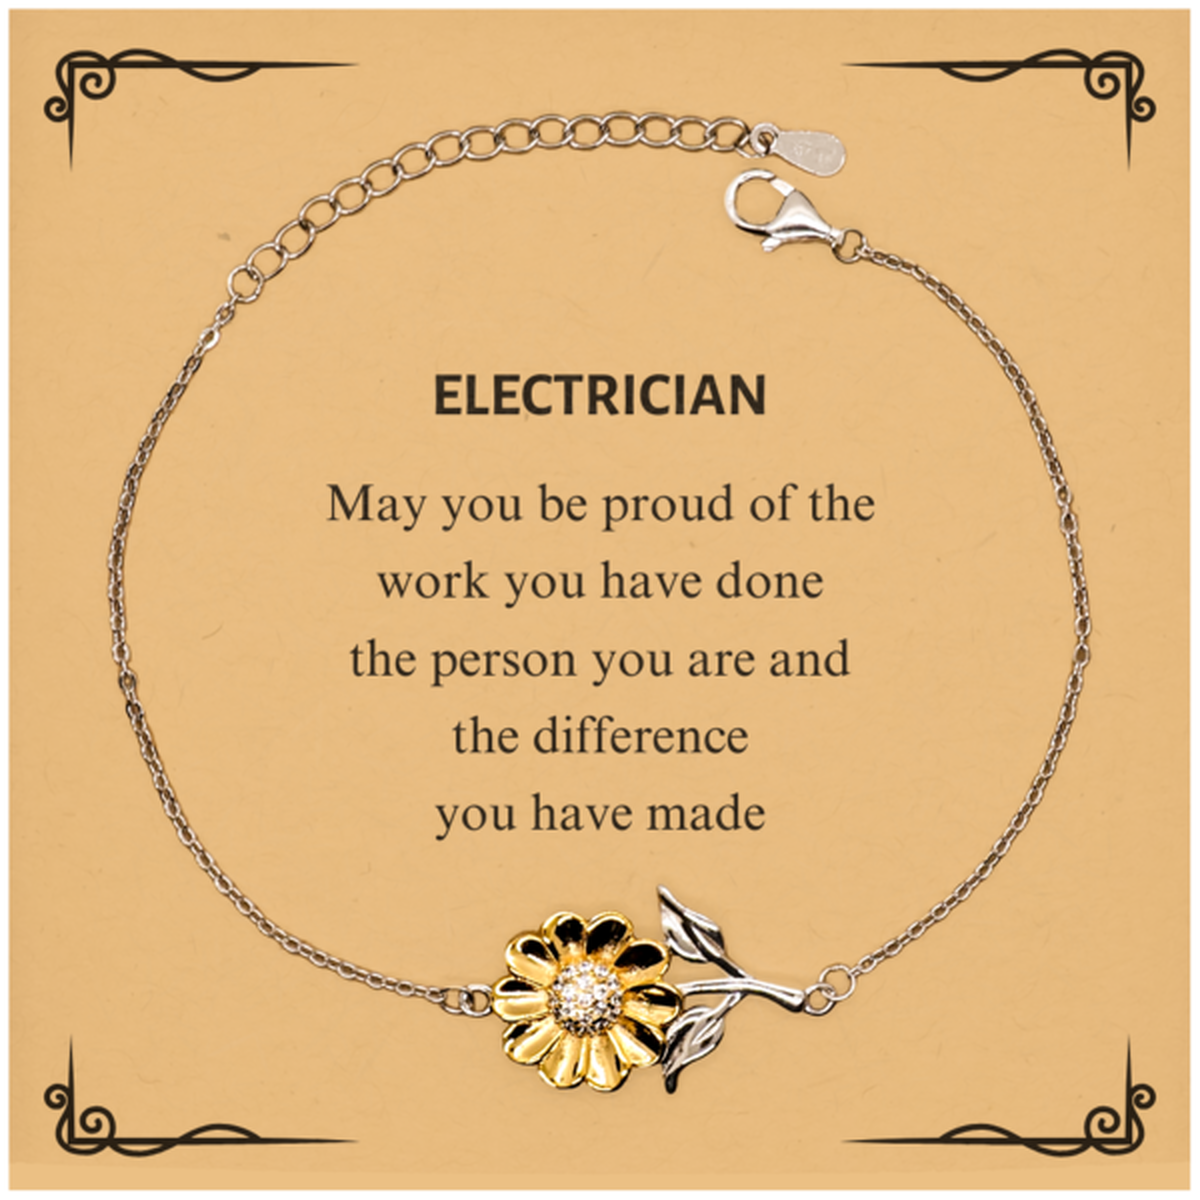 Electrician May you be proud of the work you have done, Retirement Electrician Sunflower Bracelet for Colleague Appreciation Gifts Amazing for Electrician